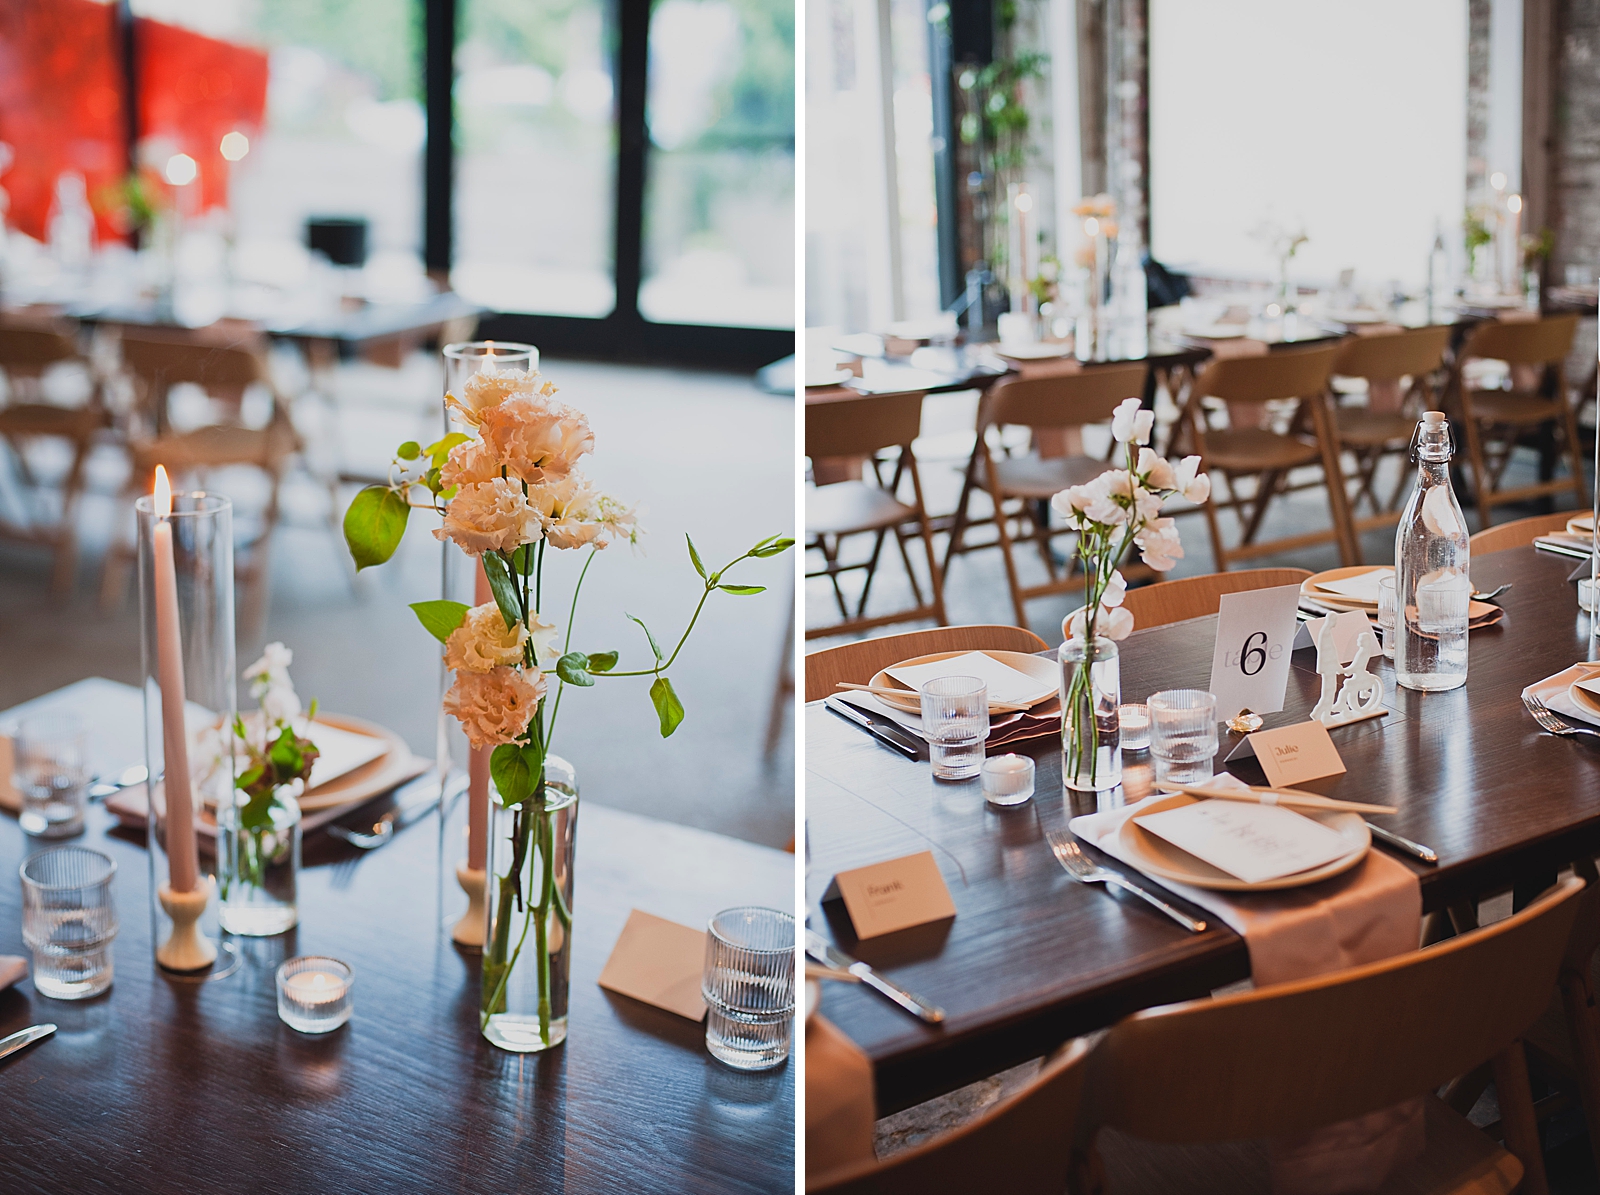 Left photo: Close up shot of a floral arrangement and candles on a reception table.
Right photo: Close up shot of place settings on a reception table. 